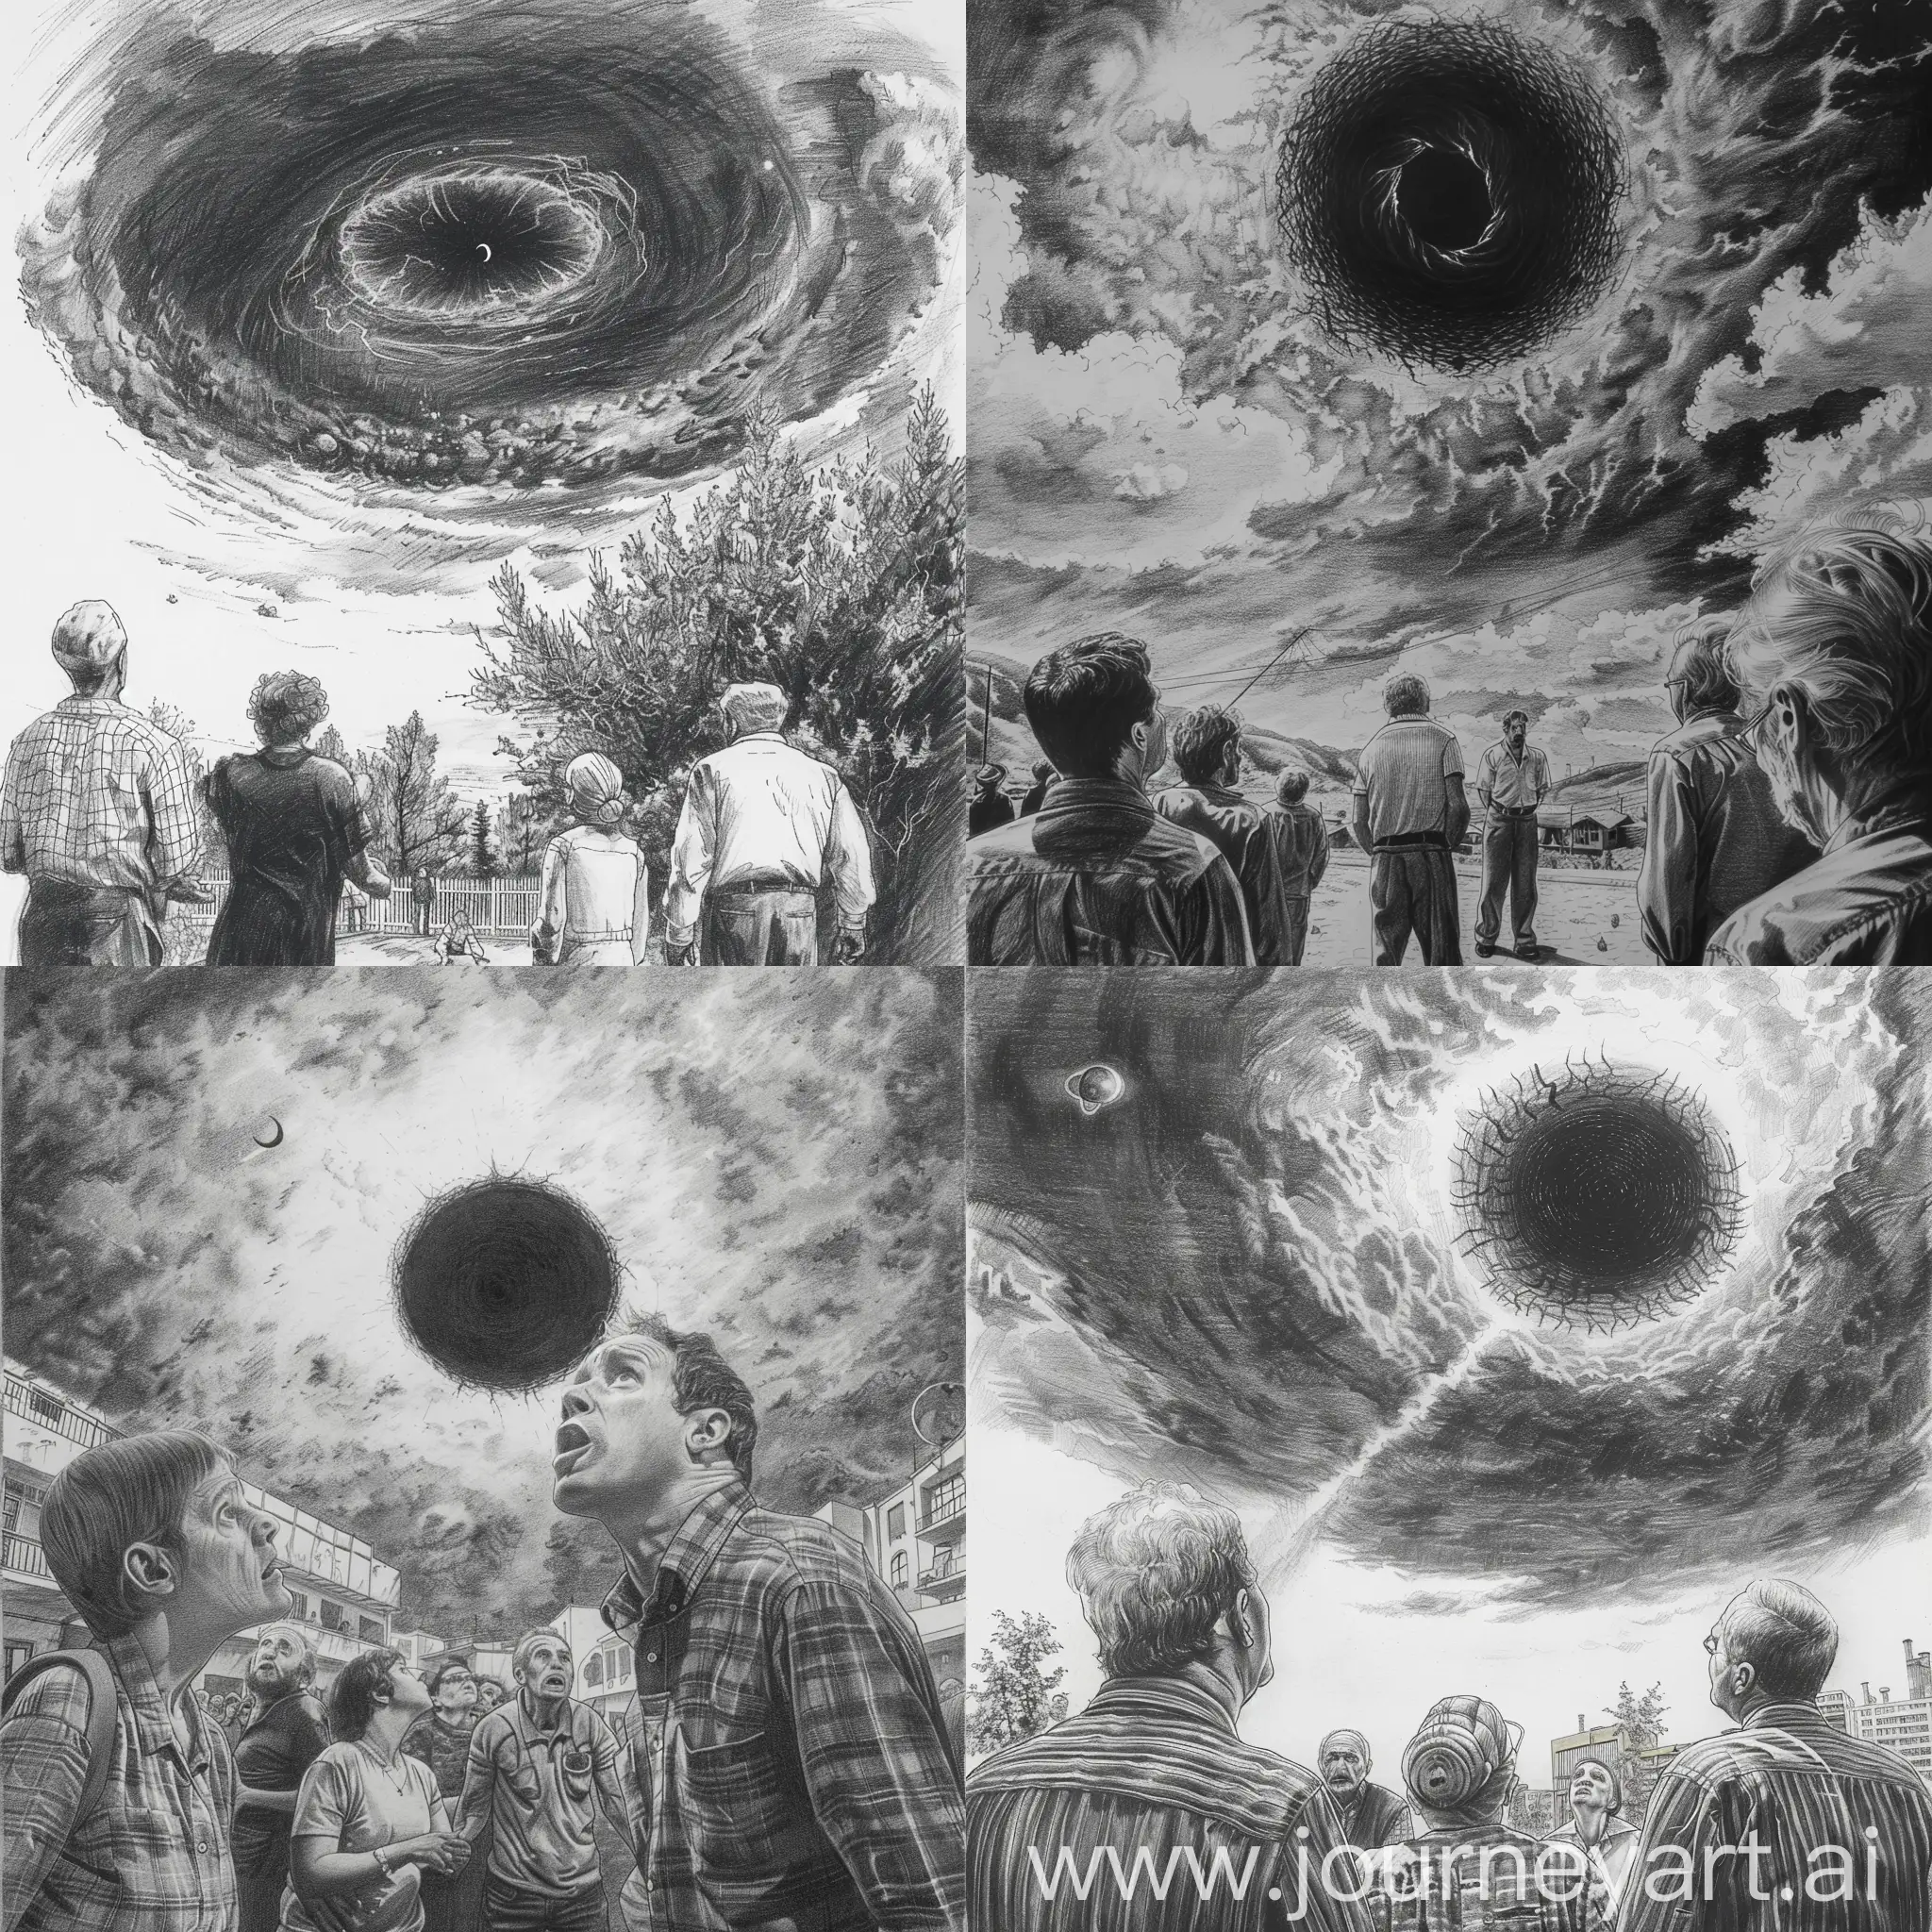 pencil drawing, black and white, people look at the sky, a large black hole has formed in the sky, people are scared